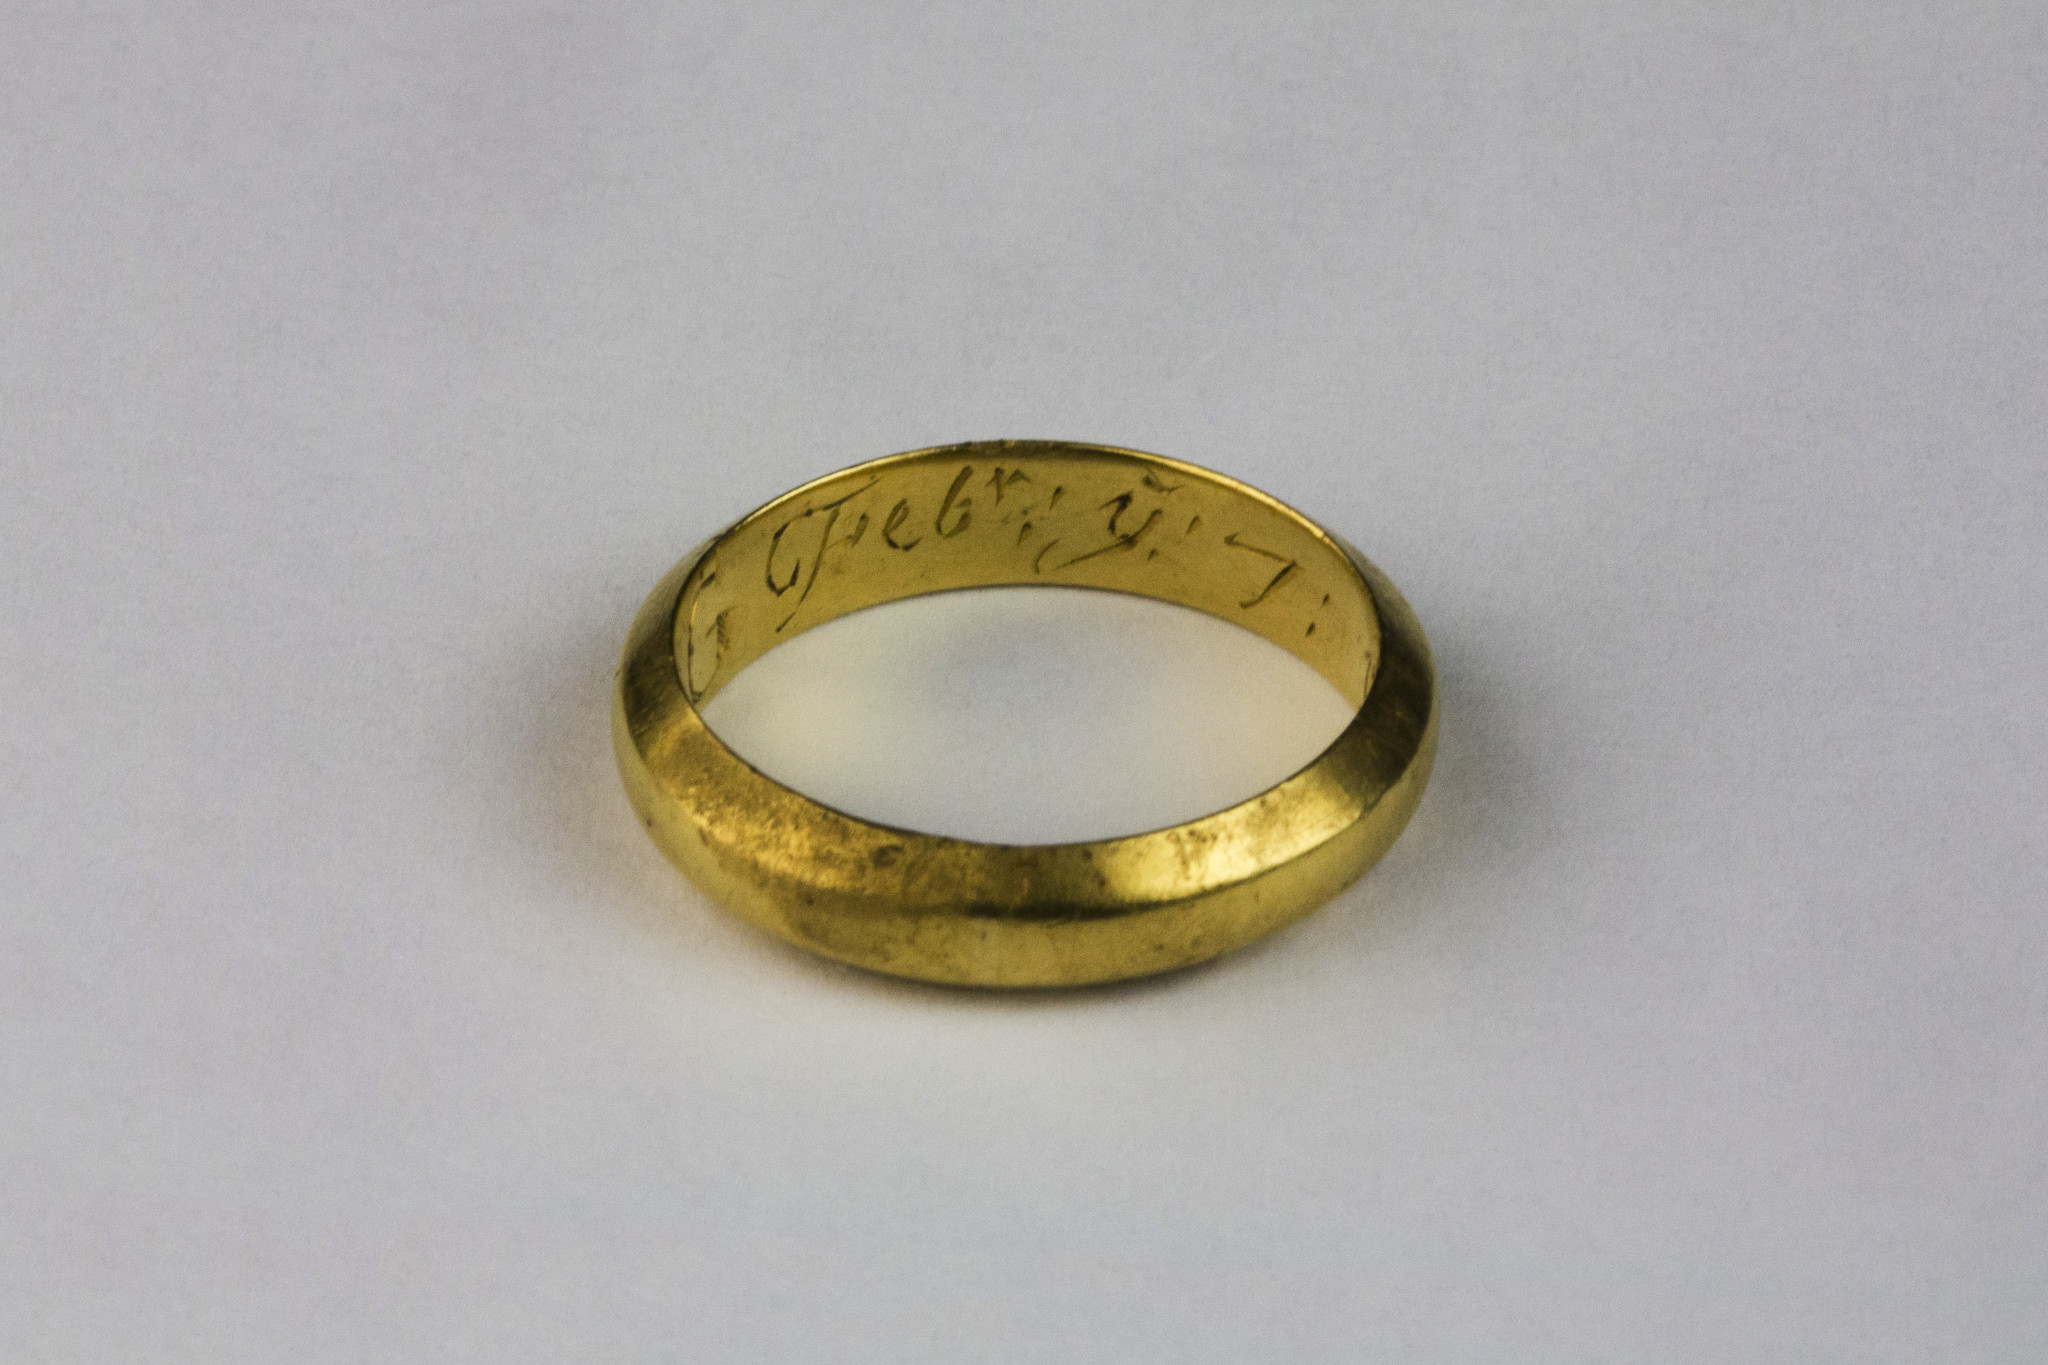 Another shot of the posy ring showing the month of February (Copyright Rubicon Heritage)